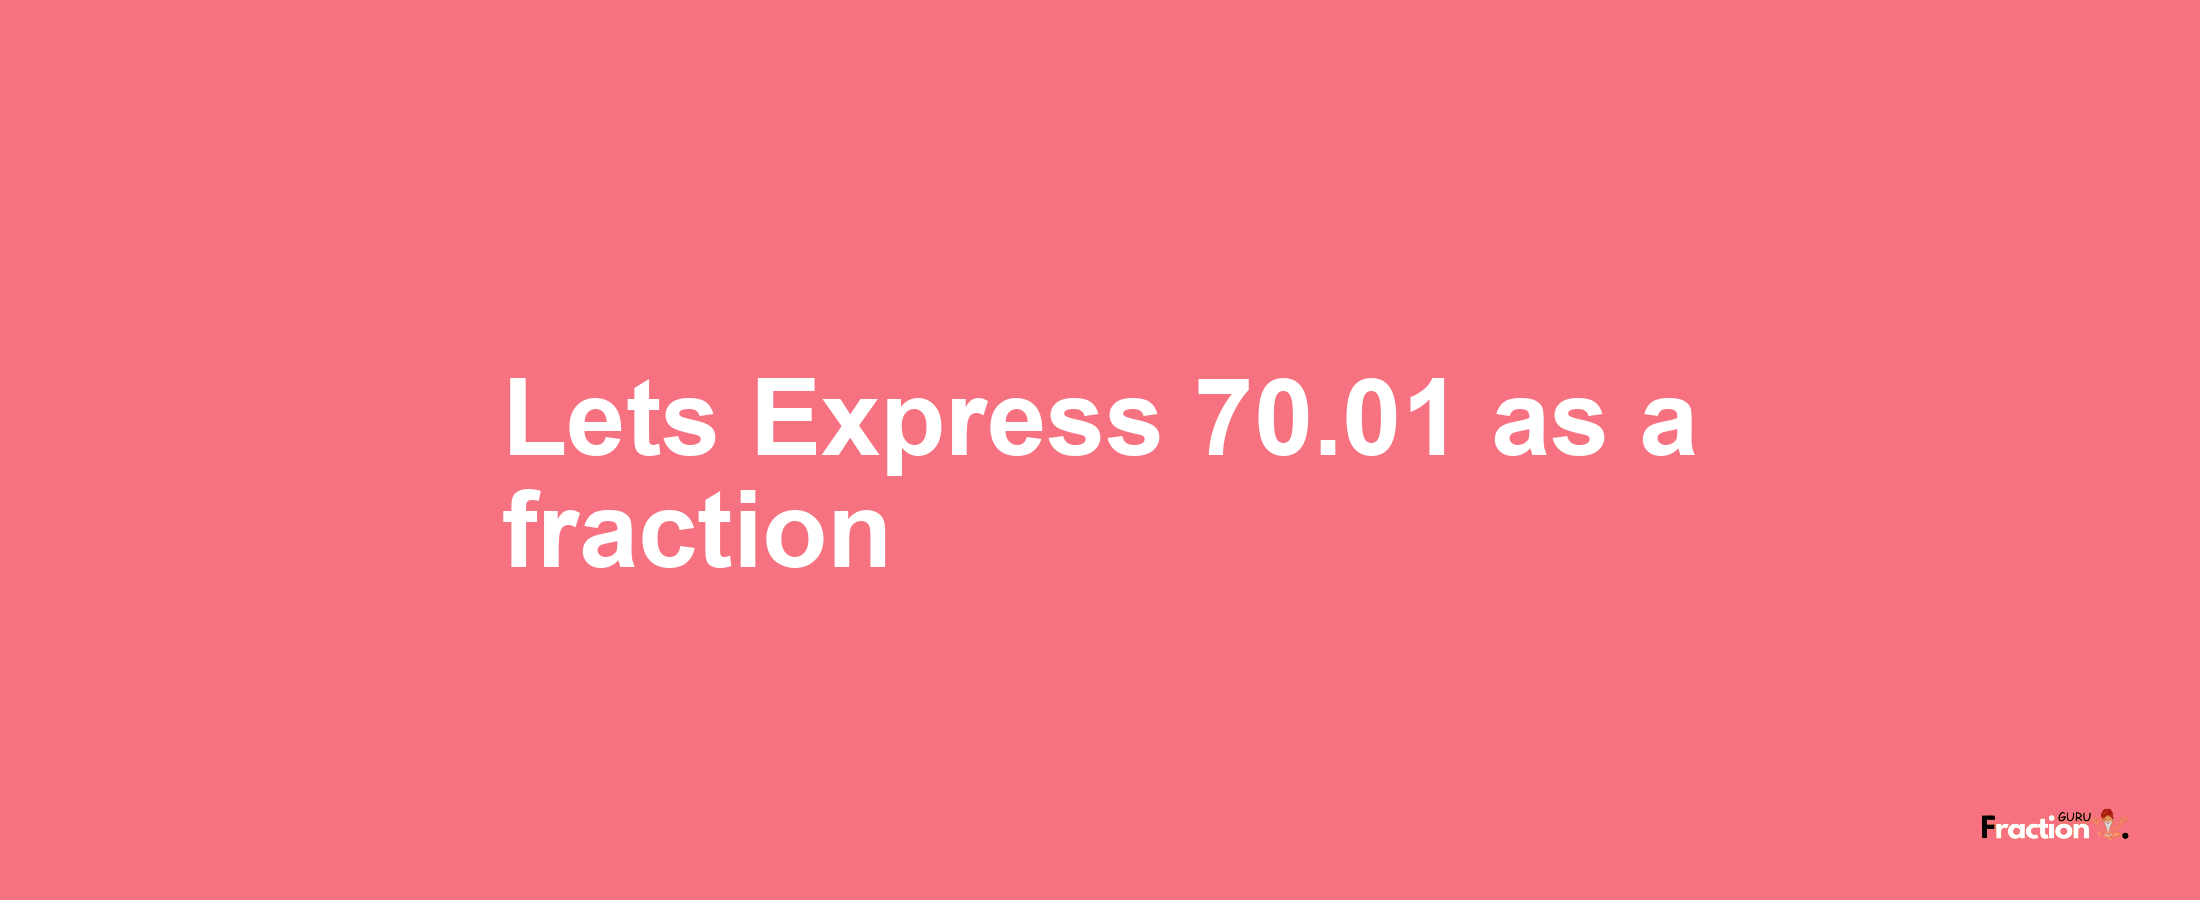 Lets Express 70.01 as afraction